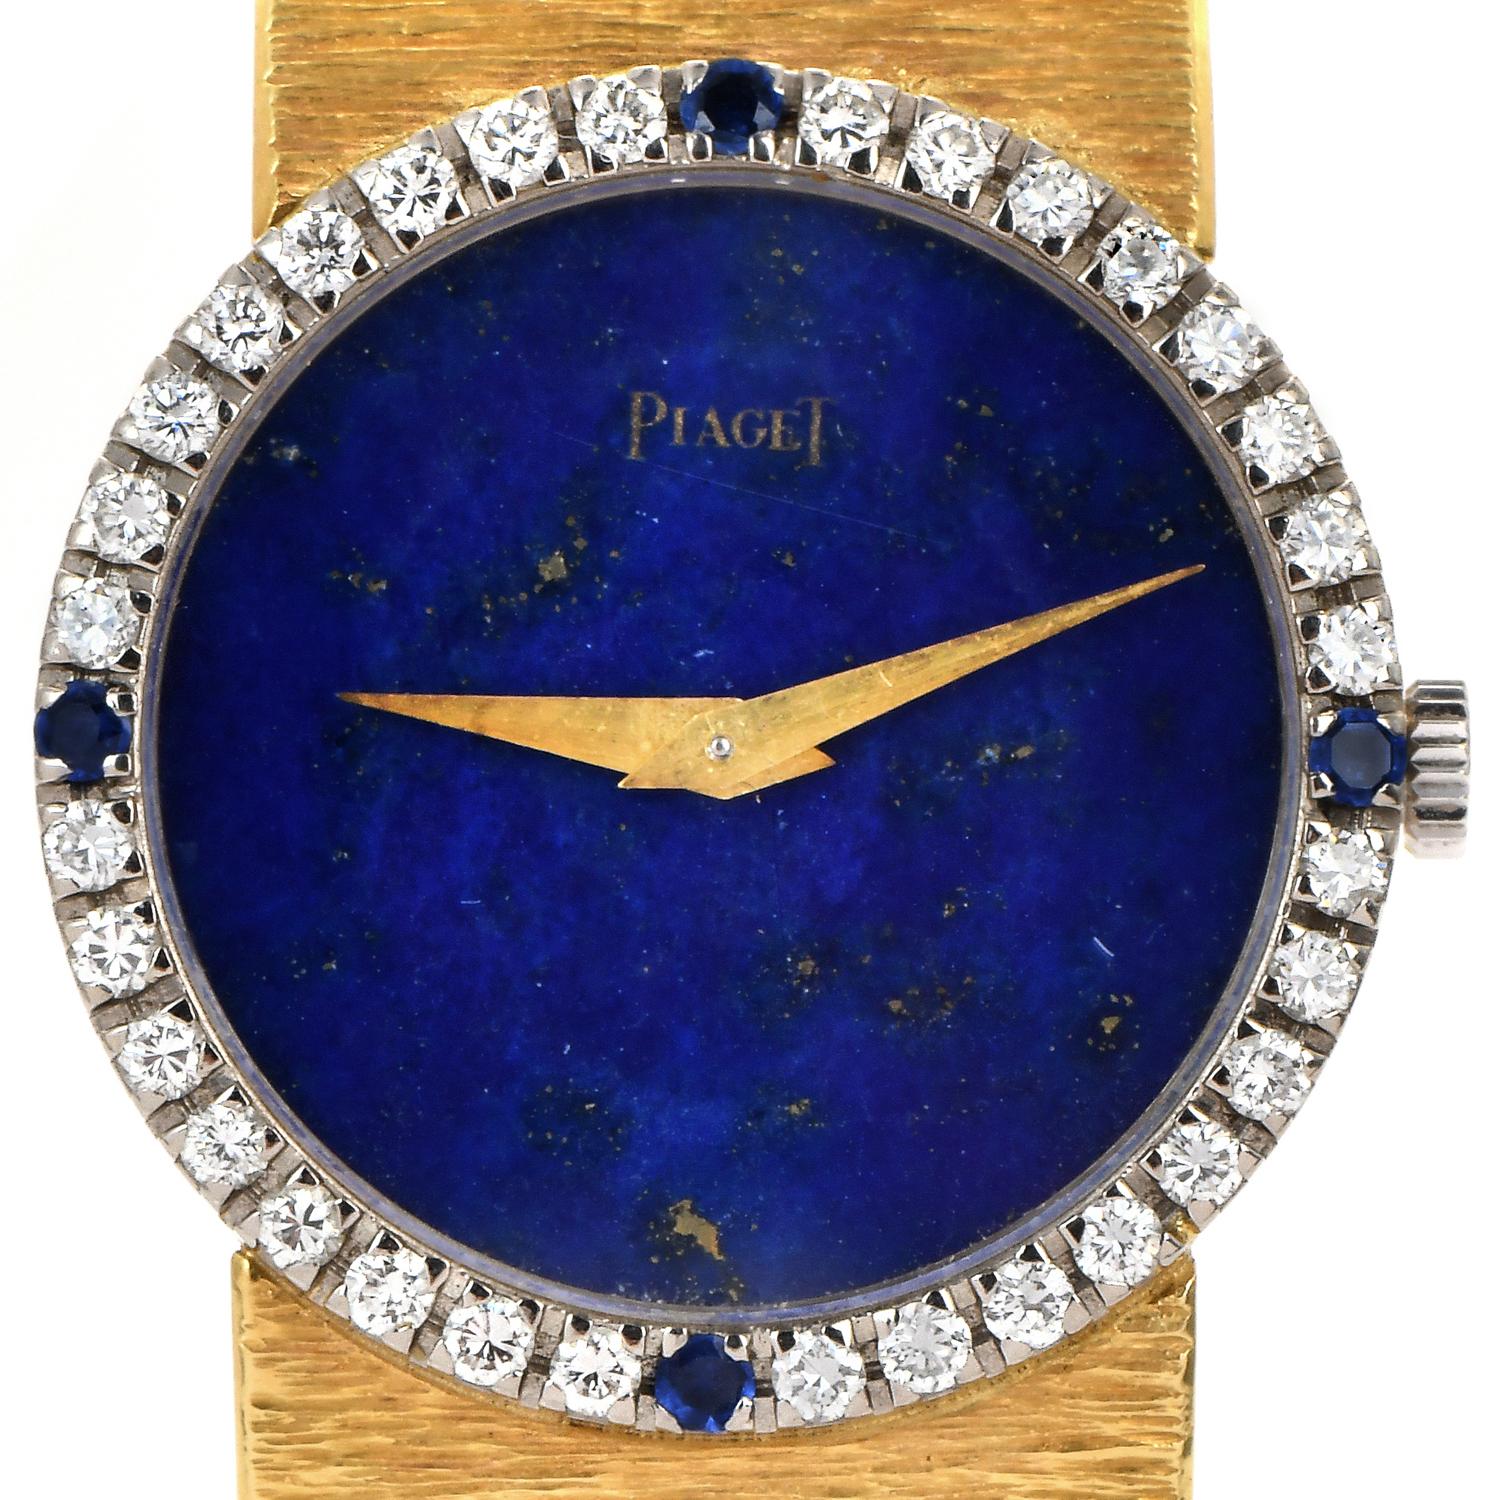 An exquisite display of brilliance and blue color, contrasting with the yellow gold.

From Circa in the Late 1980s.

crafted in solid 18K yellow gold. 

Embellished with factory set diamonds & blue sapphires. Sapphire Crystal, Genuine Lapis Dial,